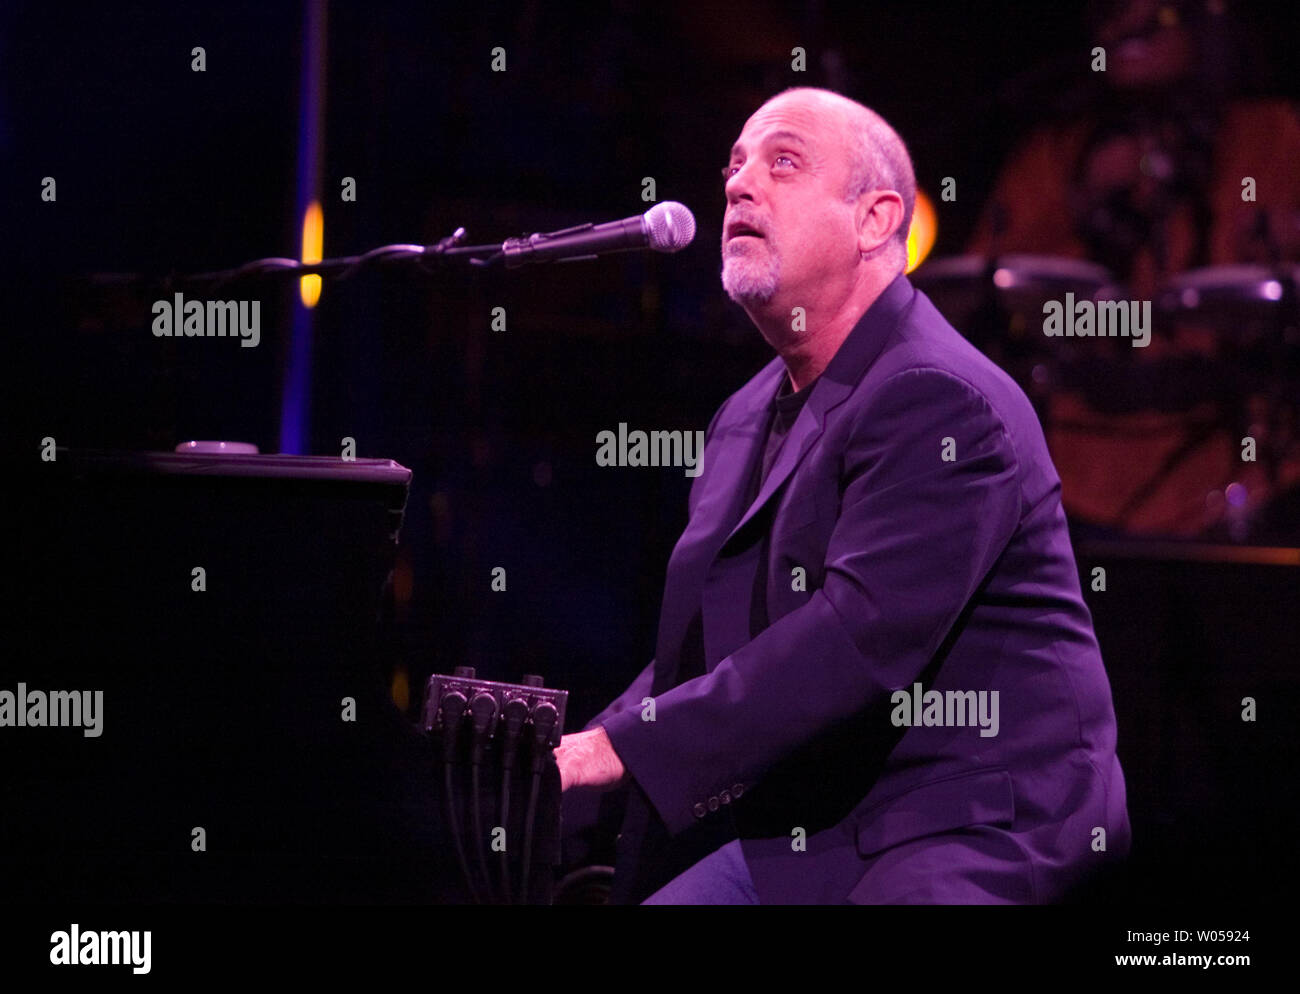 Billy Joel looks up as he performs 'Piano Man' at the Key Arena in Seattle on November 8, 2007.  Seattle was the 4th stop on a tour of 15 cities throughout Canada, United States and Mexico. (UPI Photo/Jim Bryant) Stock Photo